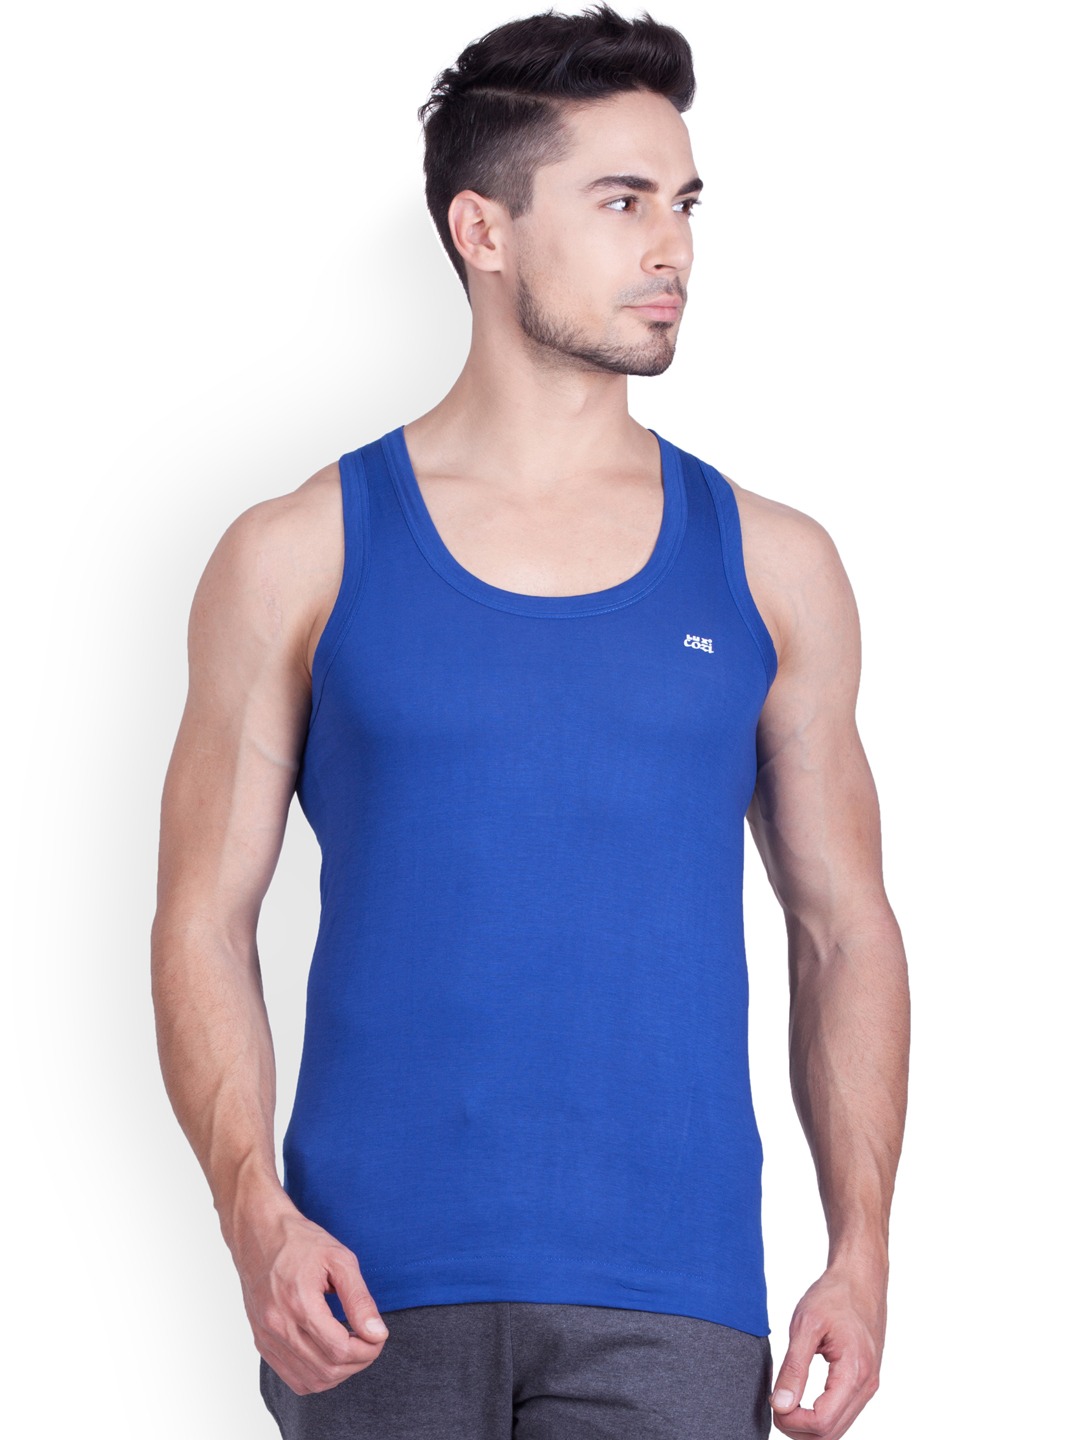 Clothing Innerwear Vests | Lux Cozi Pack of 6 Innerwear Vests COZI_COL_RN_90 - HQ51952